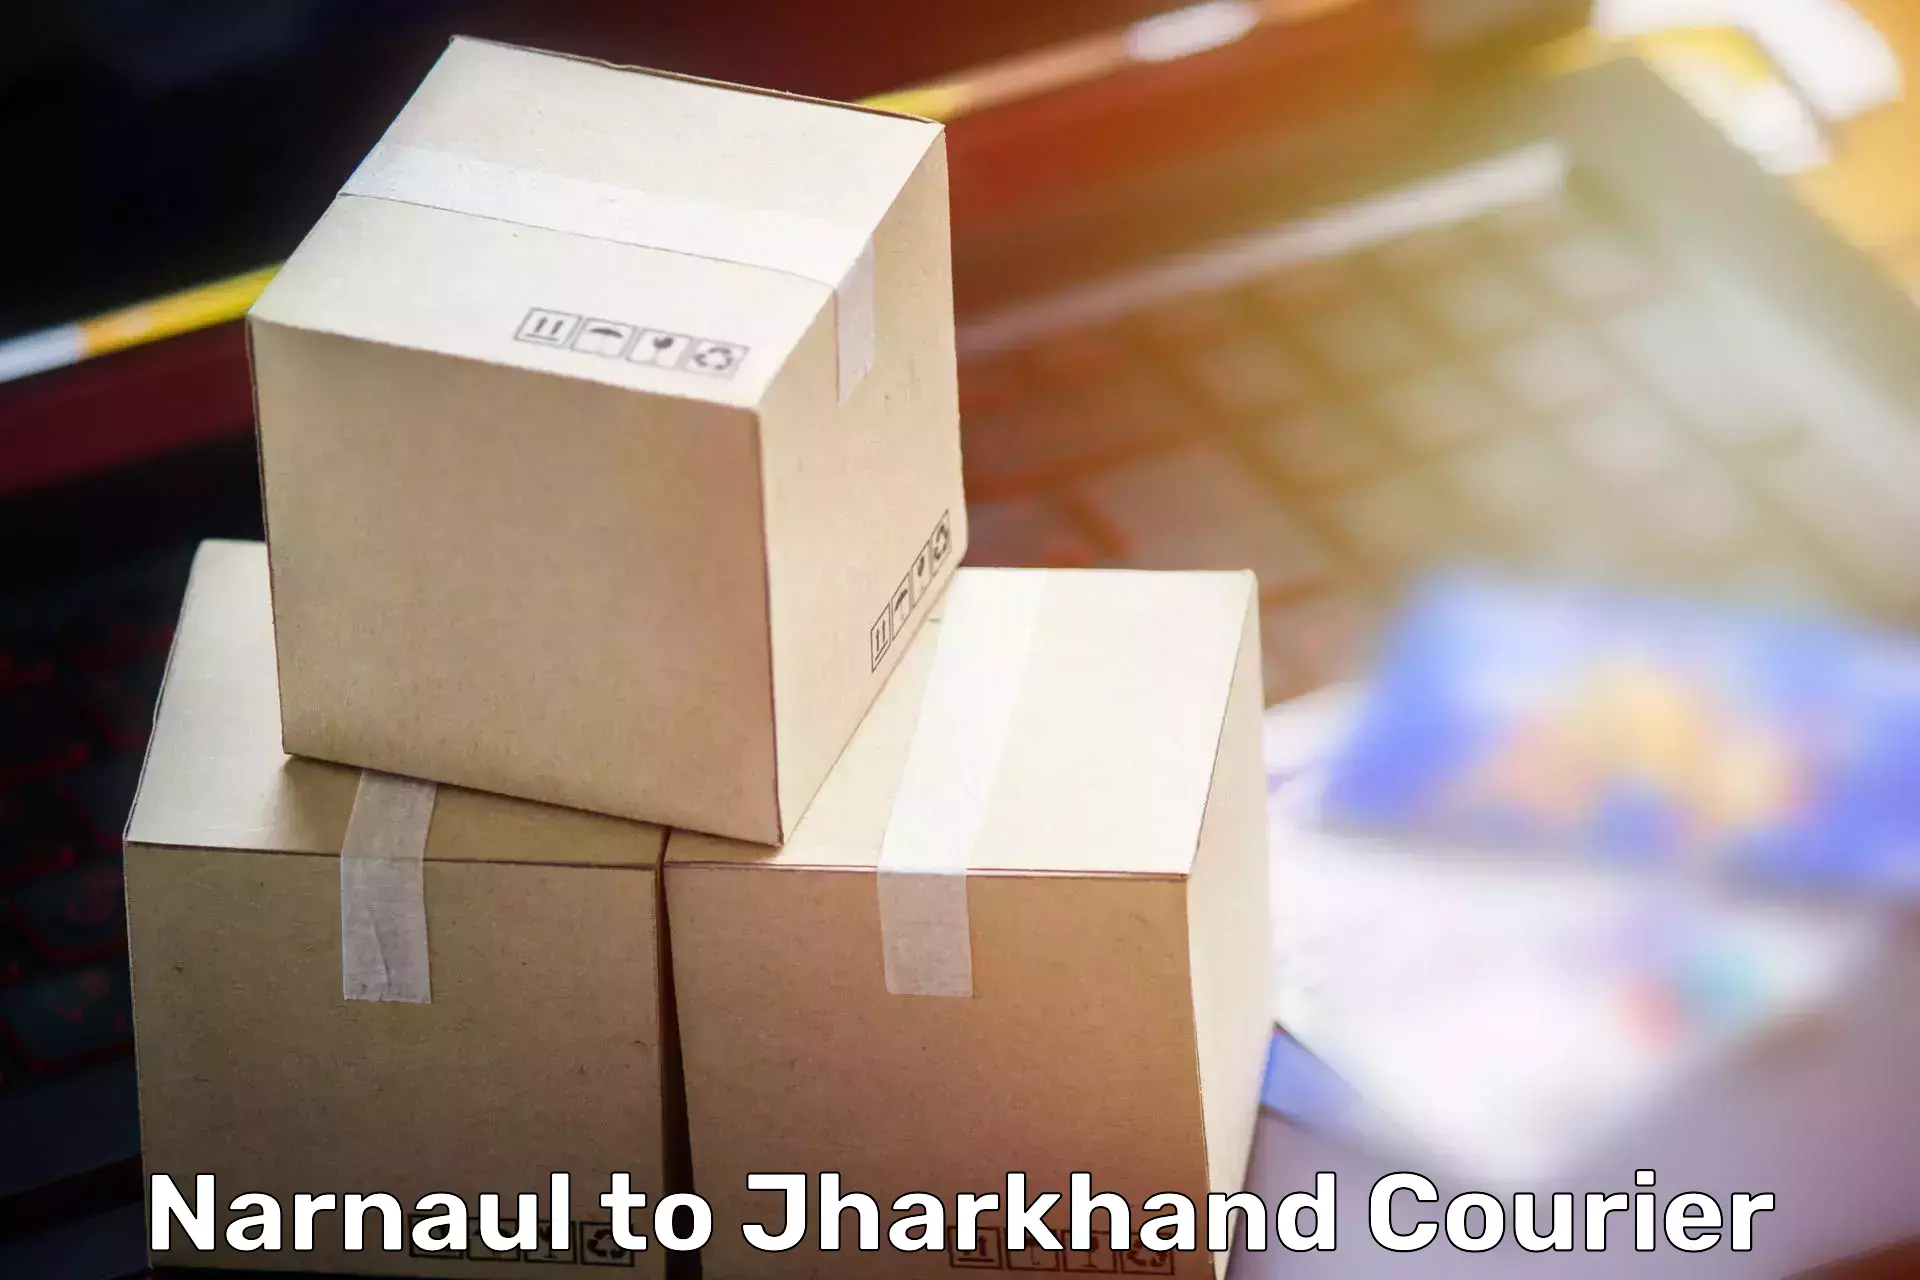 Furniture delivery service Narnaul to Manoharpur